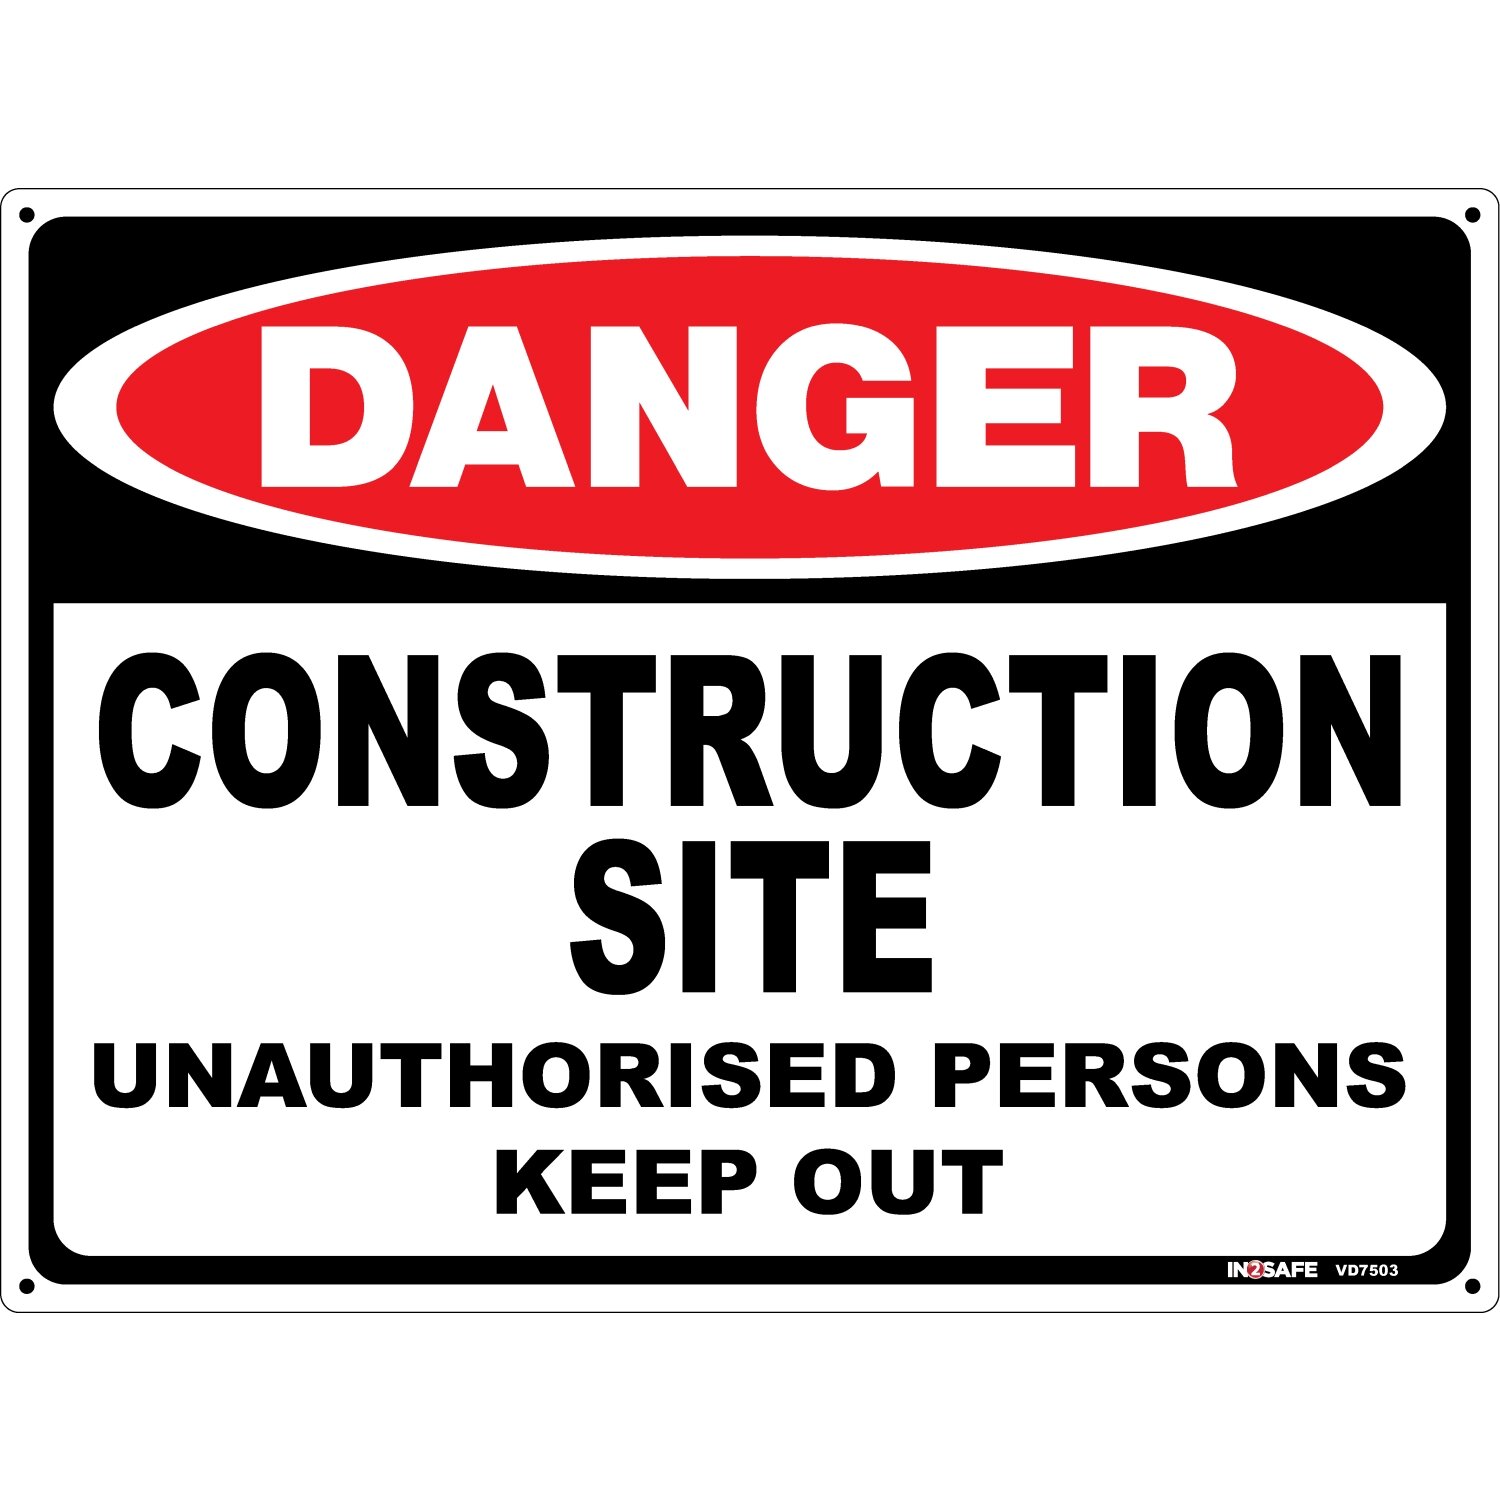 DANGER Construction Site Unauthorised Persons Keep Out